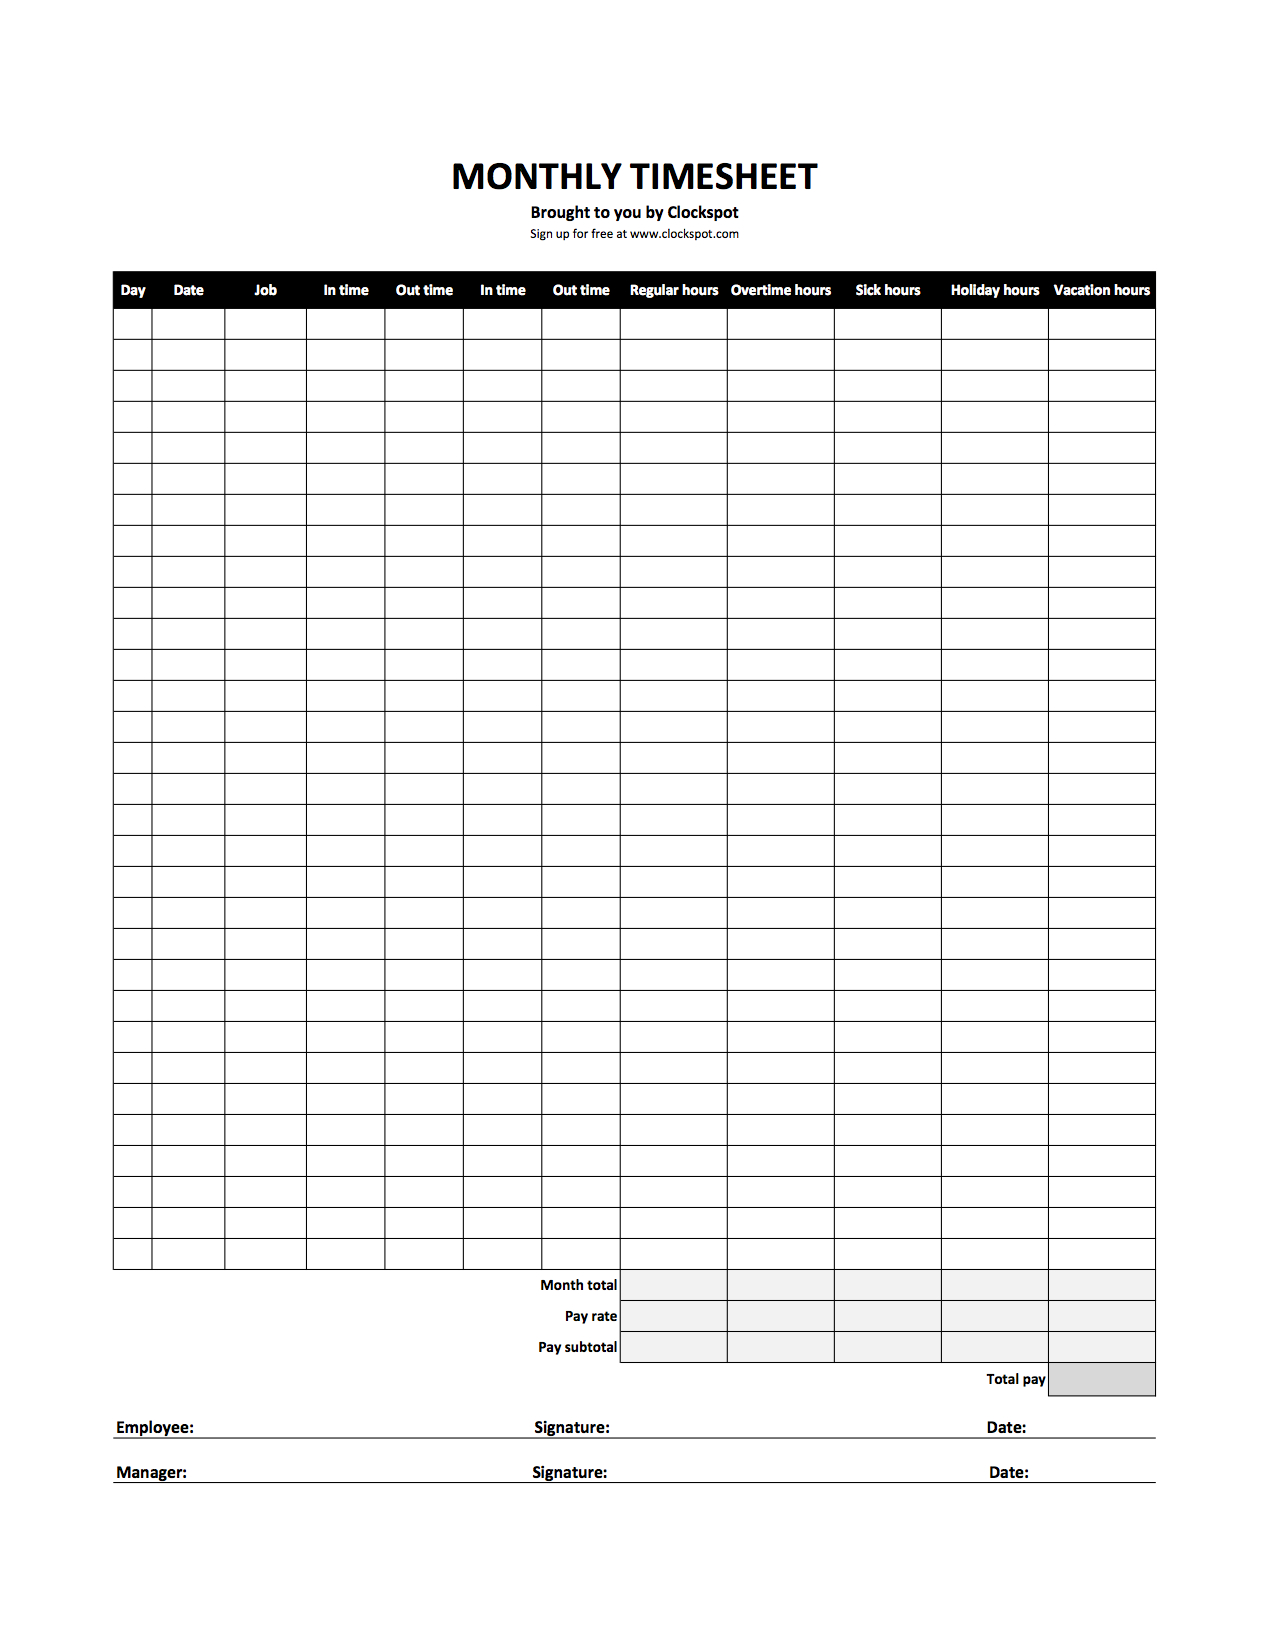 Free Time Tracking Spreadsheets | Excel Timesheet Templates to Employee Hour Tracking Template